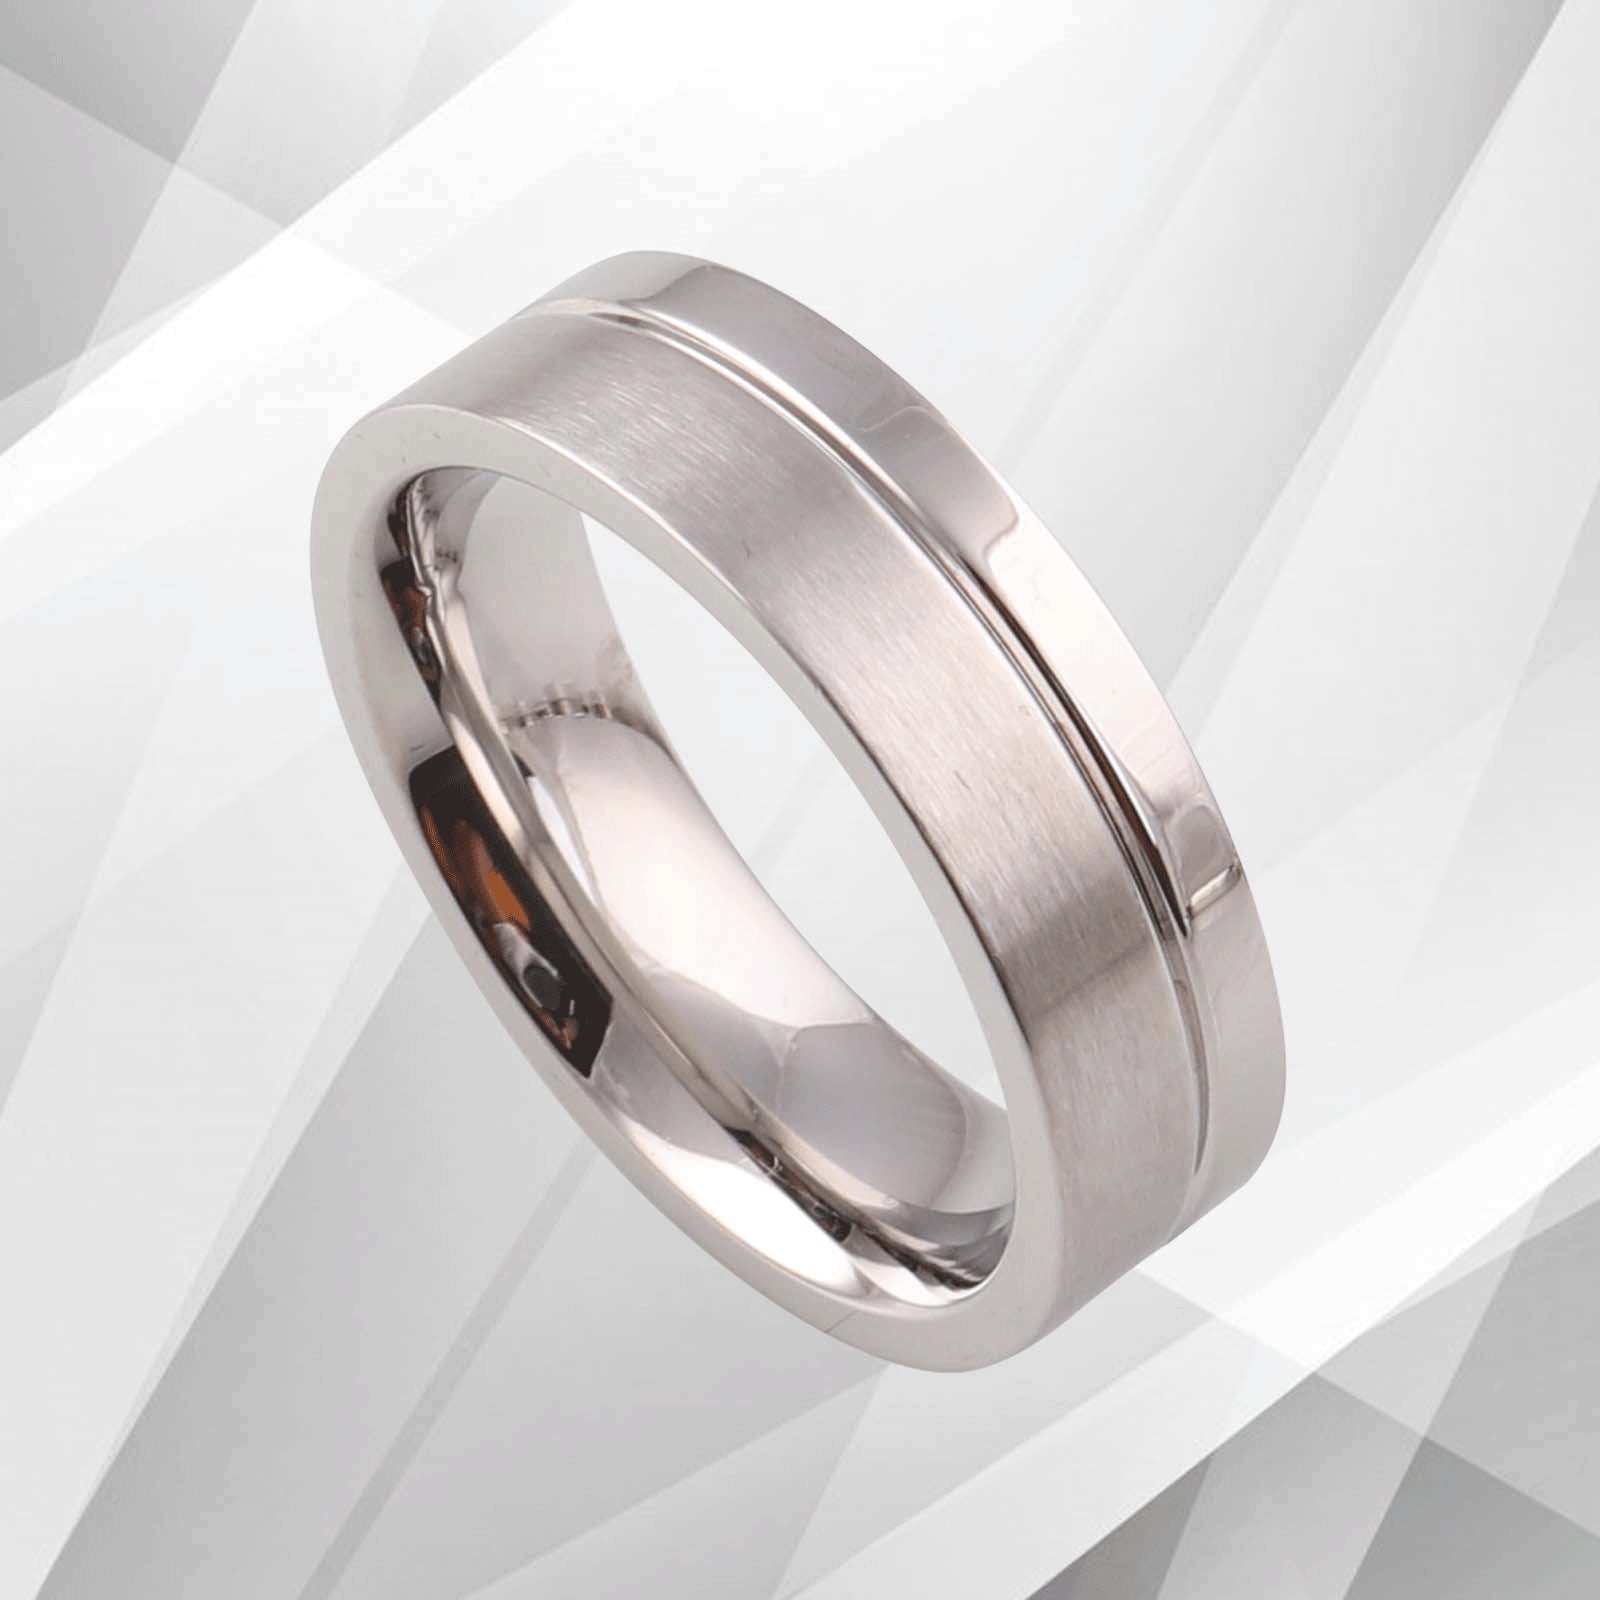 6mm Tungsten Carbide Wedding Band with White Gold Finish - Comfort Fit, Men's Engagement Ring Bijou Her